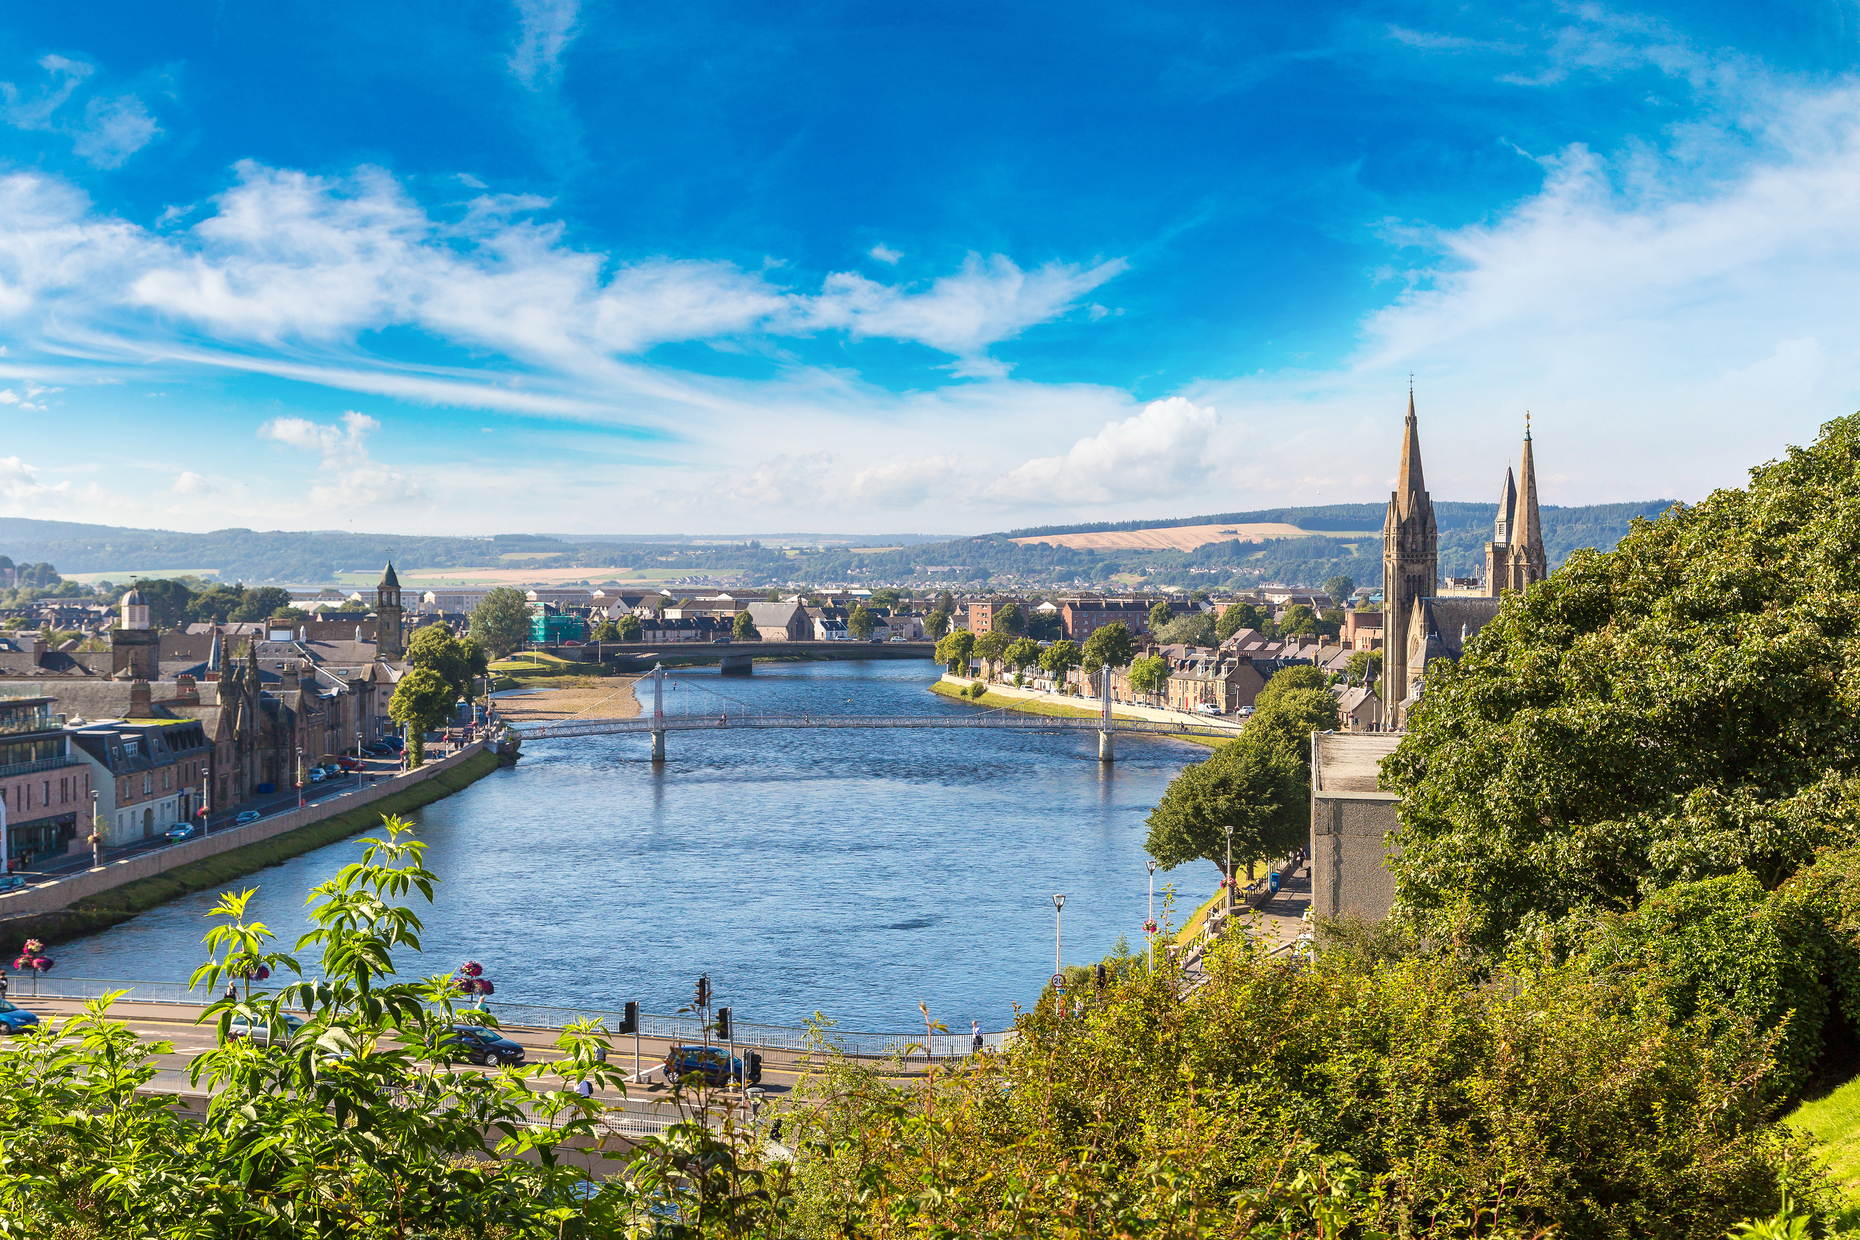 Fans of the series <em>Outlander </em>are likely to put <a href="https://www.visitscotland.com/places-to-go/inverness/things-to-do" rel="noreferrer noopener">Inverness</a> on their Scottish itineraries. Indeed, the city has inspired many travellers. The Culloden Battlefield, the site of the last hand-to-hand combat in the United Kingdom, is just a quick drive away. Sitting on the banks of the River Ness, Inverness also features tours of a castle and its botanical garden. It’s also an excellent entry point for exploring the Highlands or venturing onto Loch Ness.